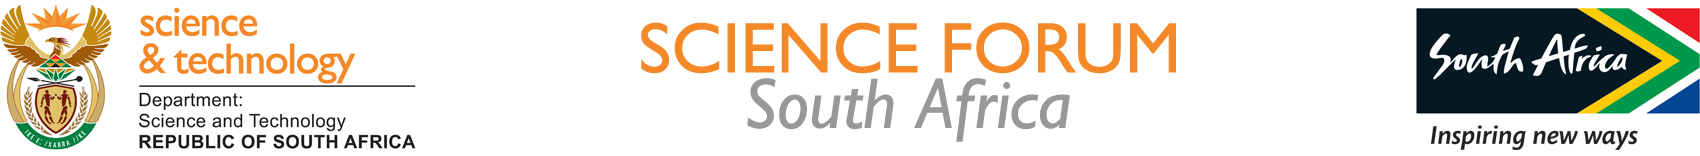 Science Technology SCIENCE FORUM South Africa